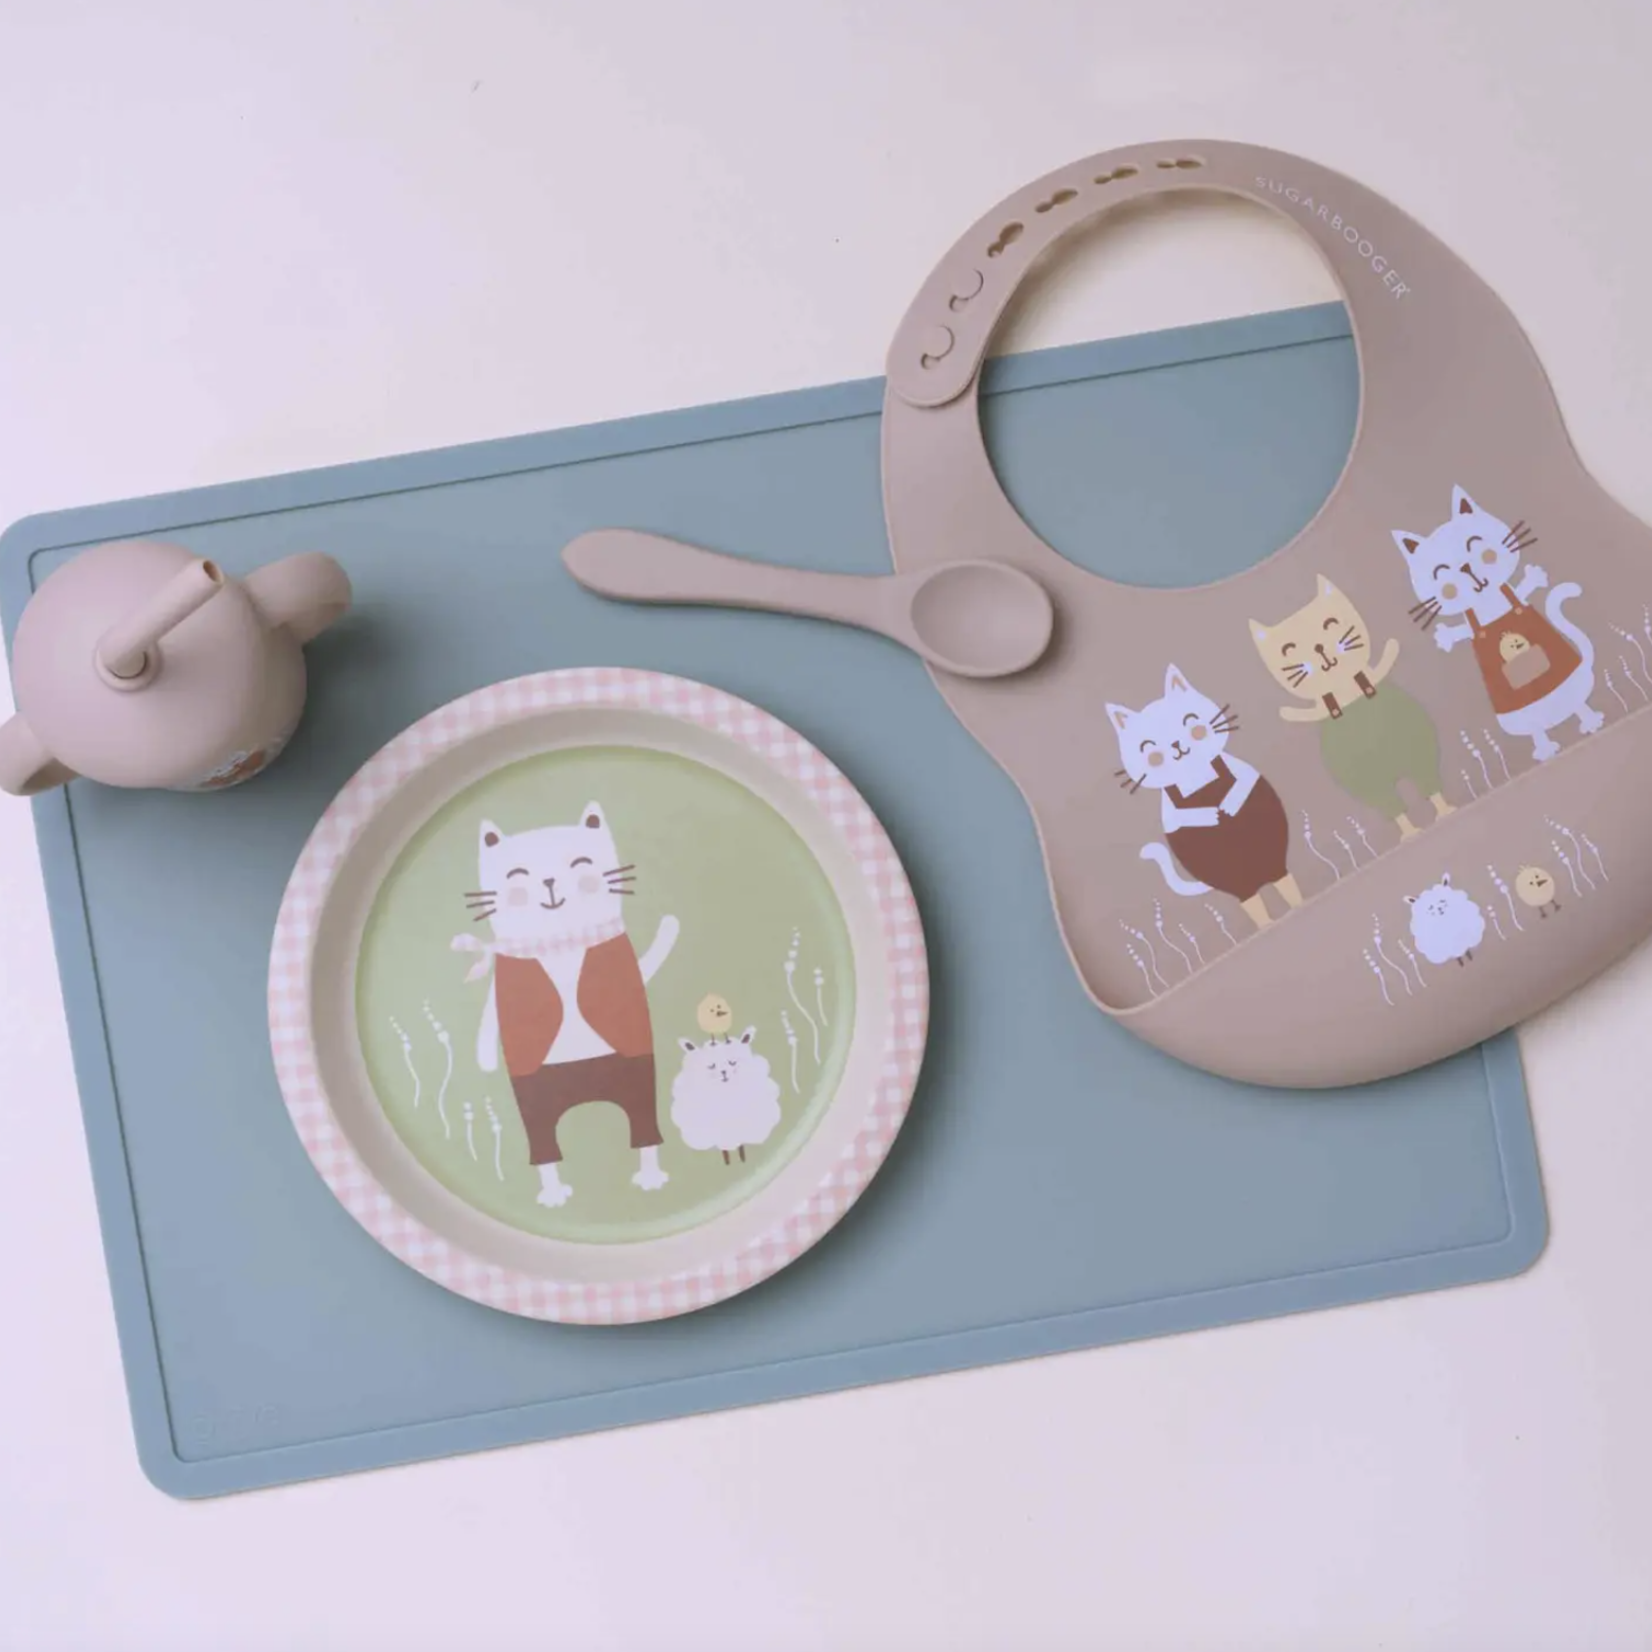 Sugarbooger Silicone Placemat | Light Blue